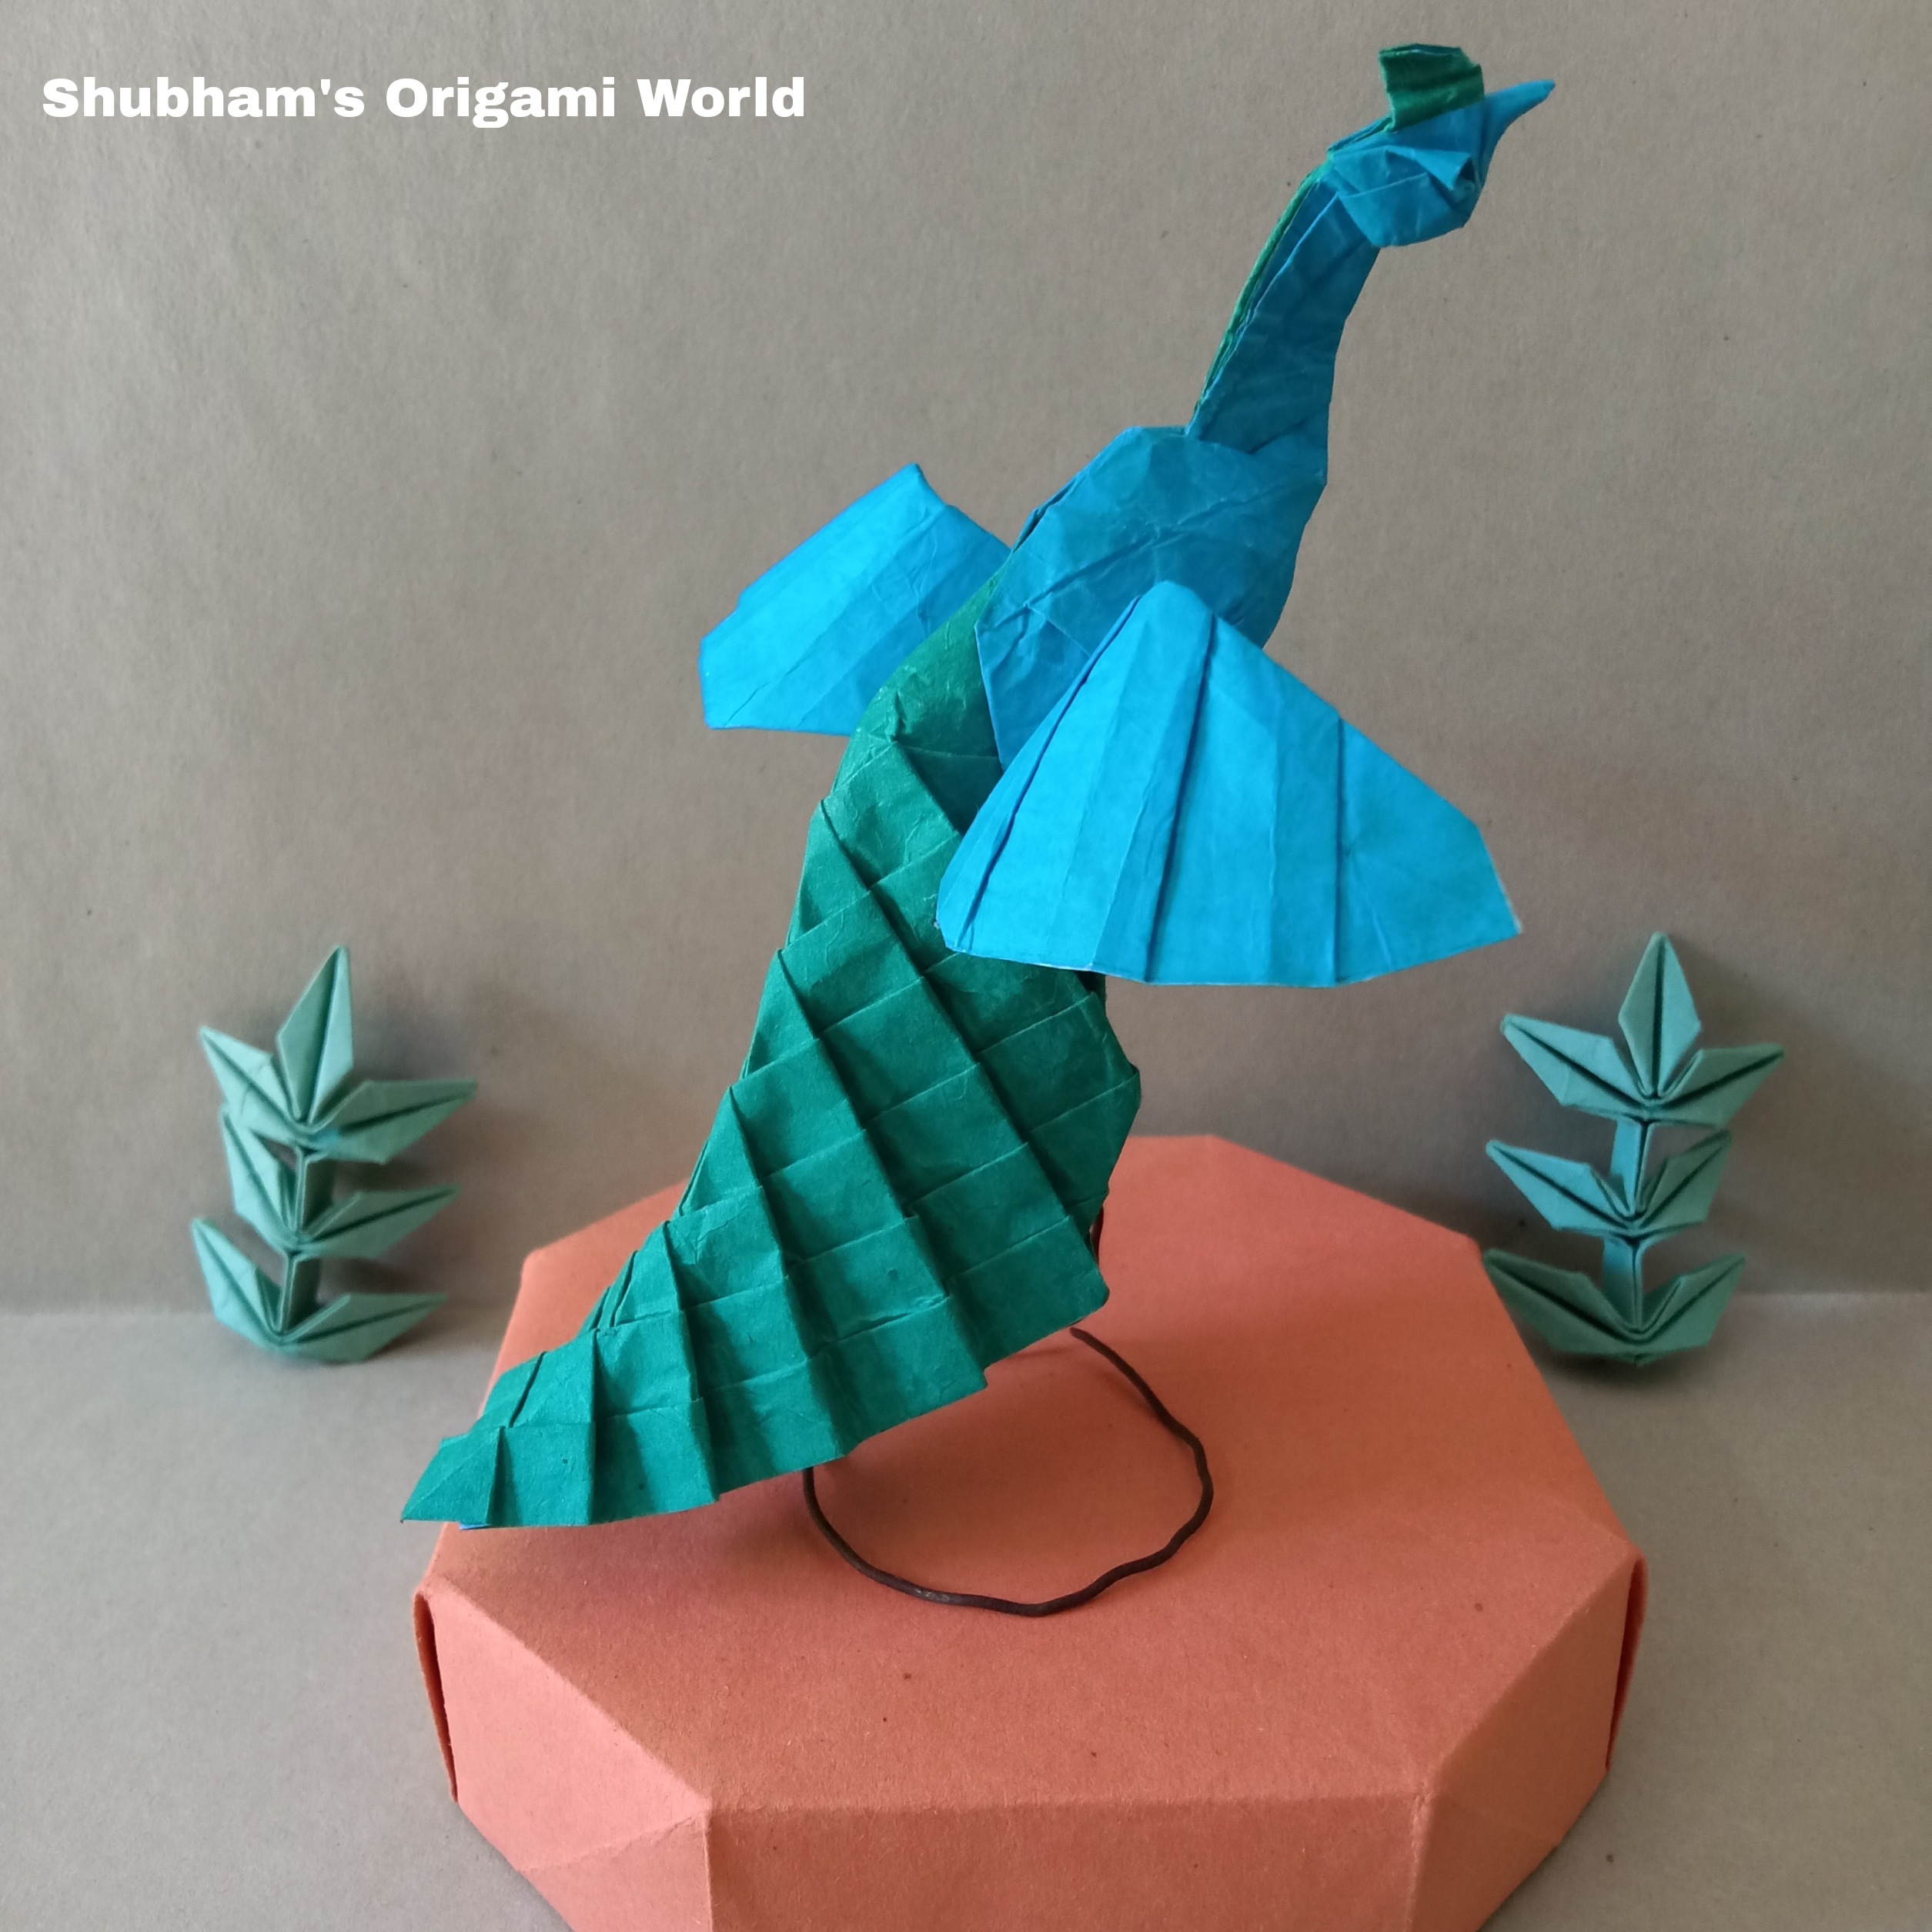 Origami Peacock by Shubham Mathur